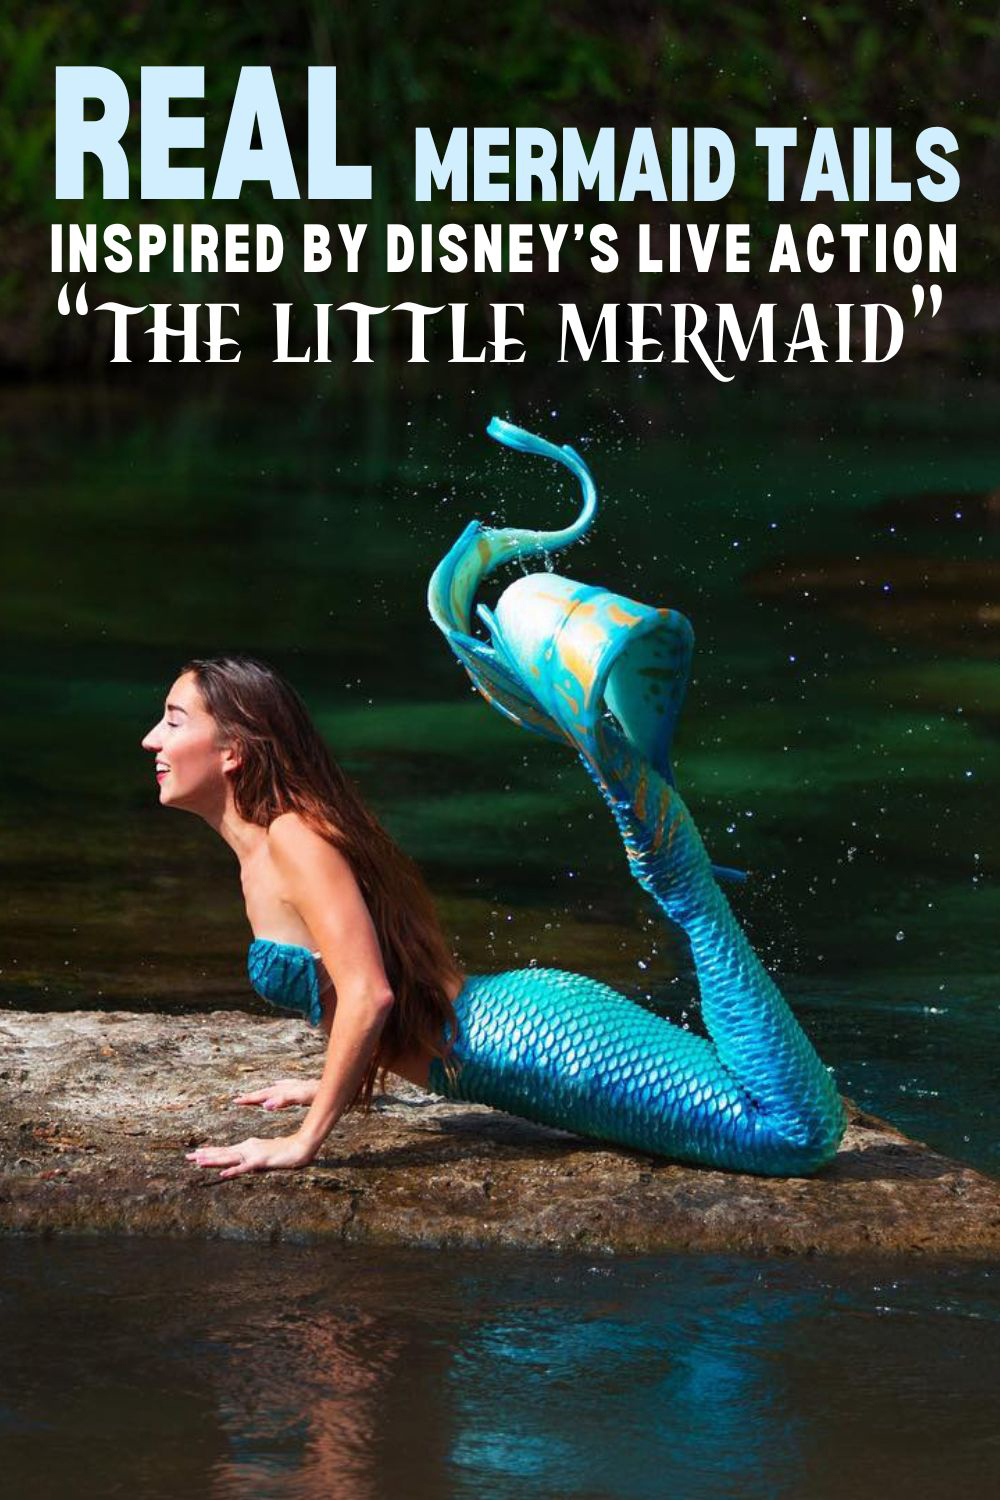 Mermaid Tails inspired by Disney's Live Action The Little Mermaid